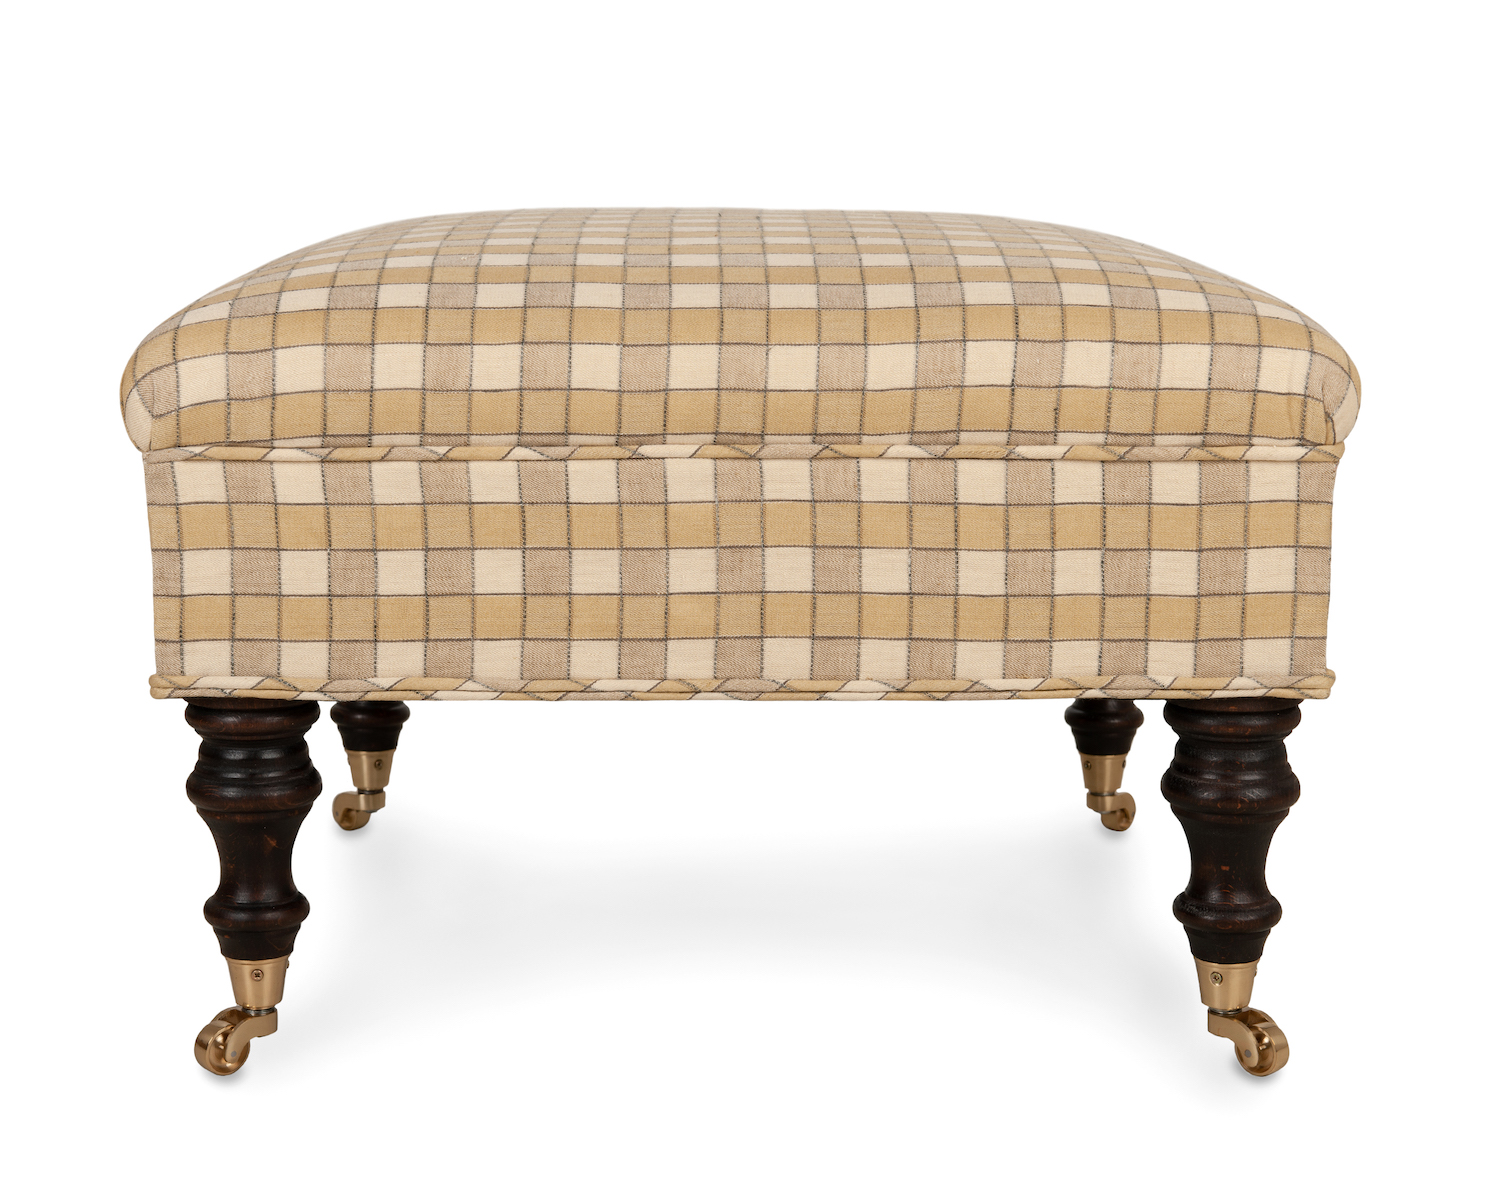 Deep Bordered Chequered Footstool with Single and Double Piping, Turned Legs with Castors